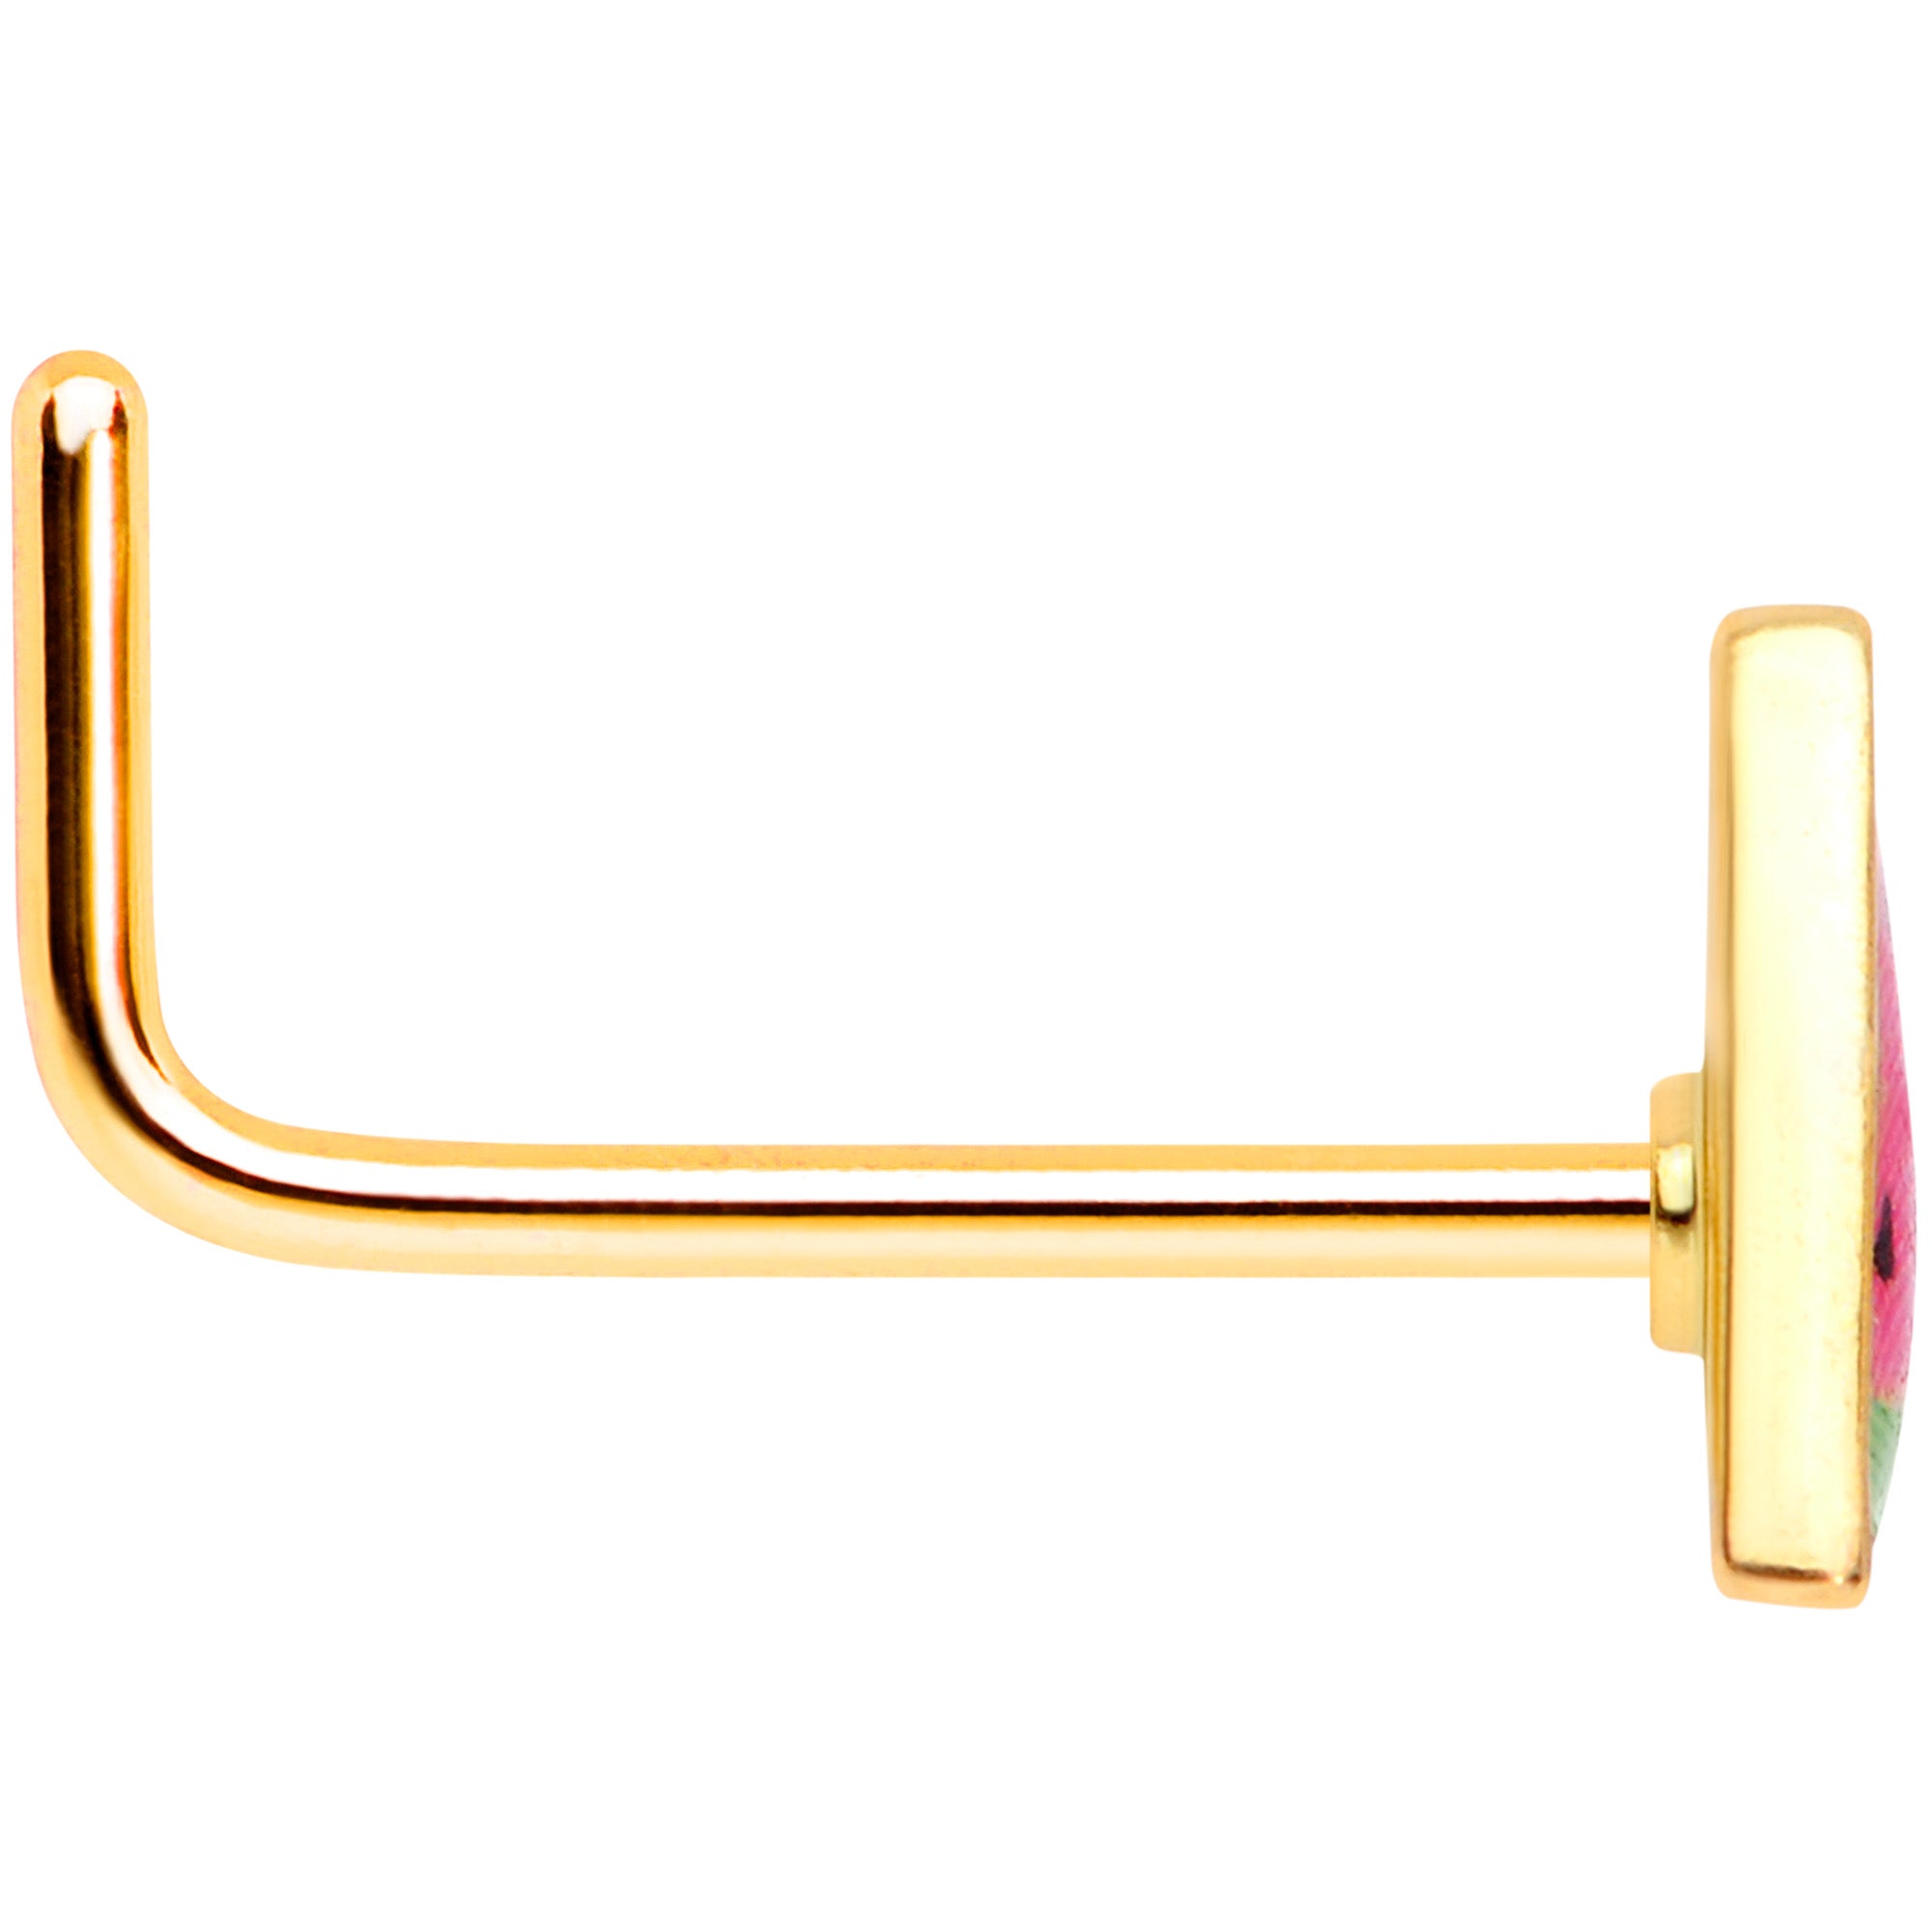 22 Gauge 5/16 Gold Tone Watermelon L Shaped Nose Ring